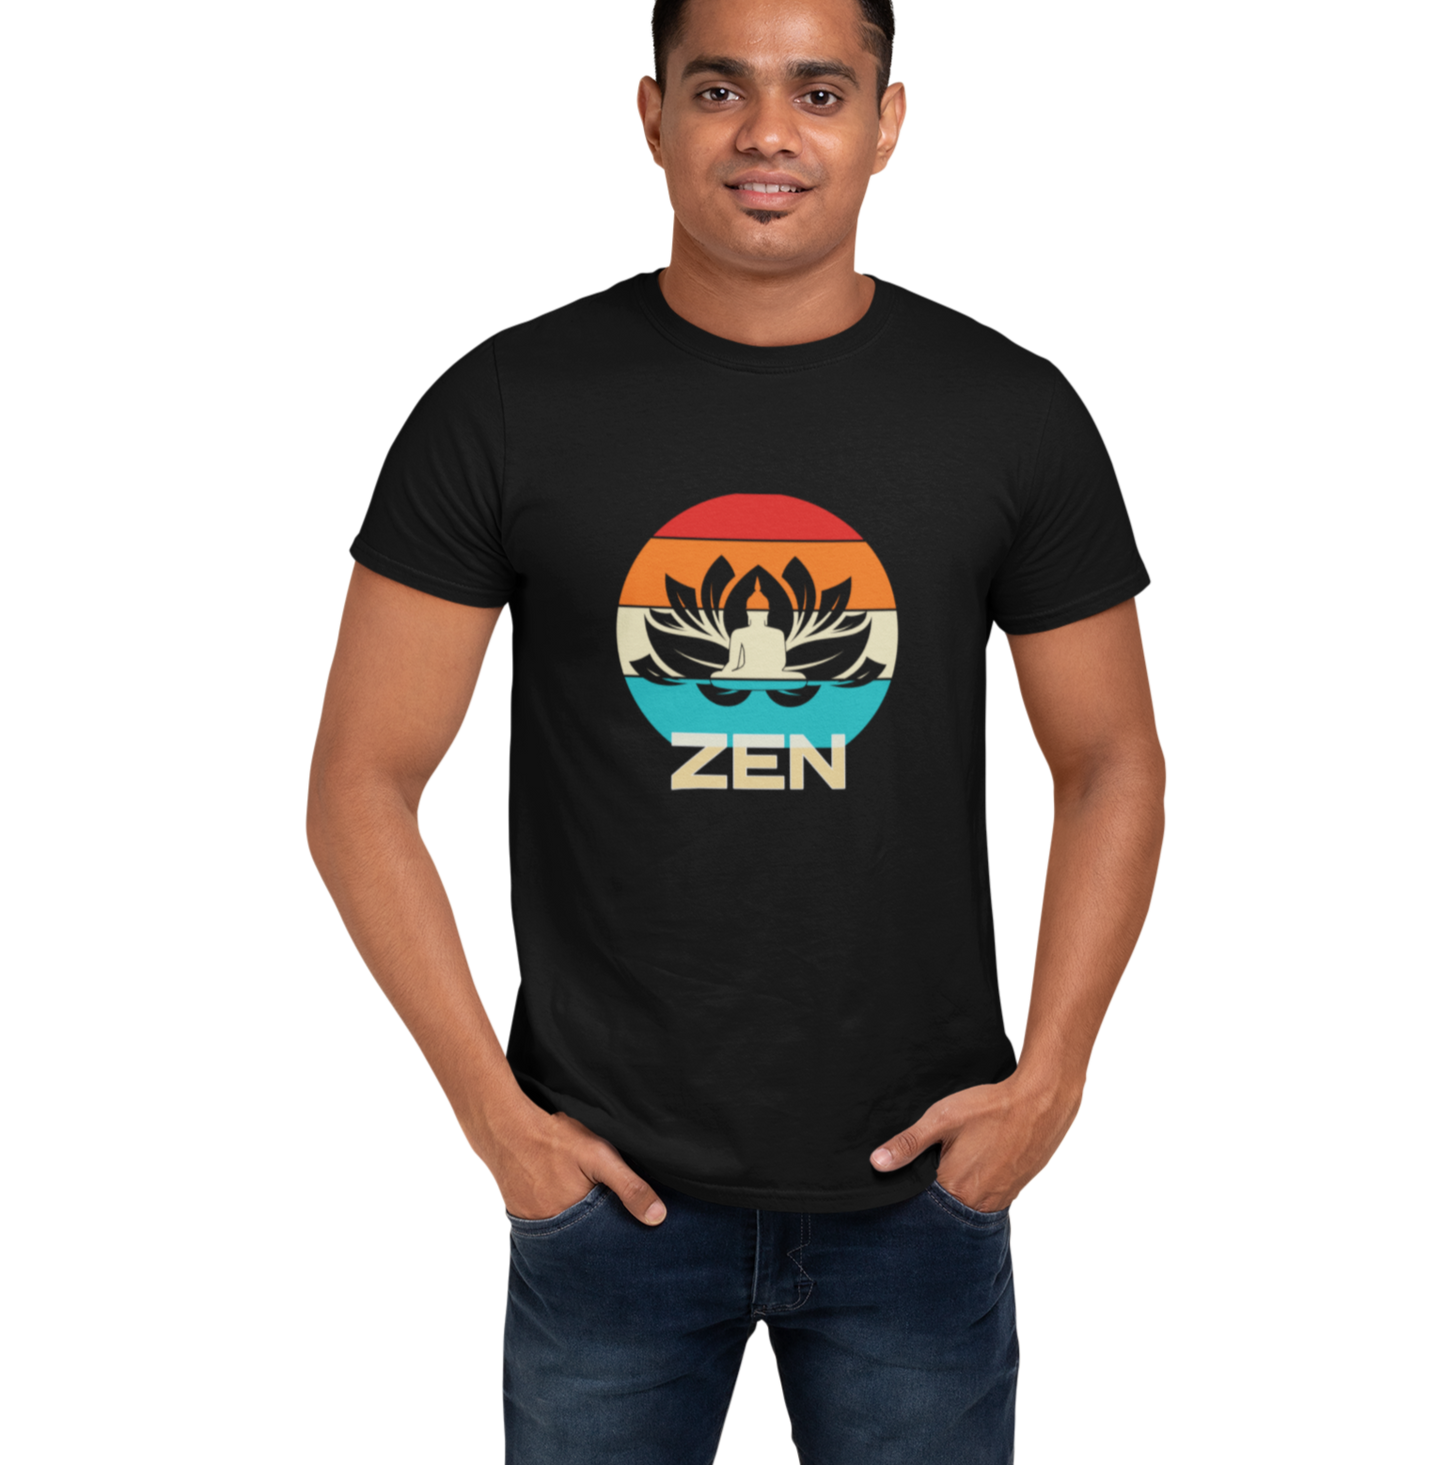 Yoga t-shirt for Men, Black color. printed with image of Buddha.